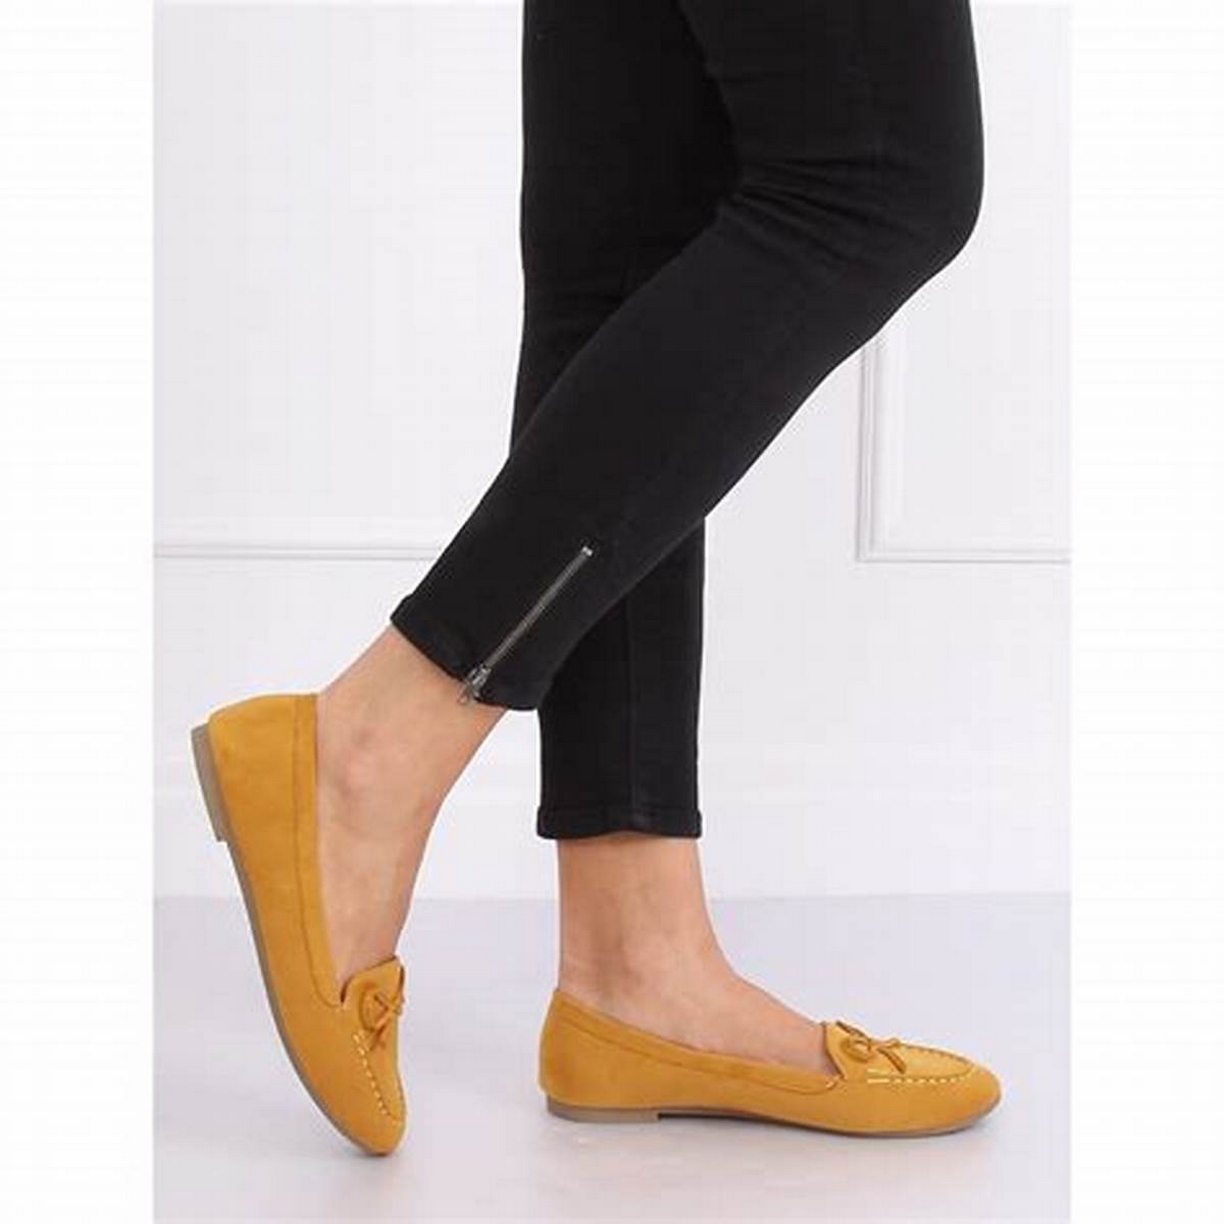 25 Recommended Best Slip On Shoes For Women Newest 2021 Style Female 2335